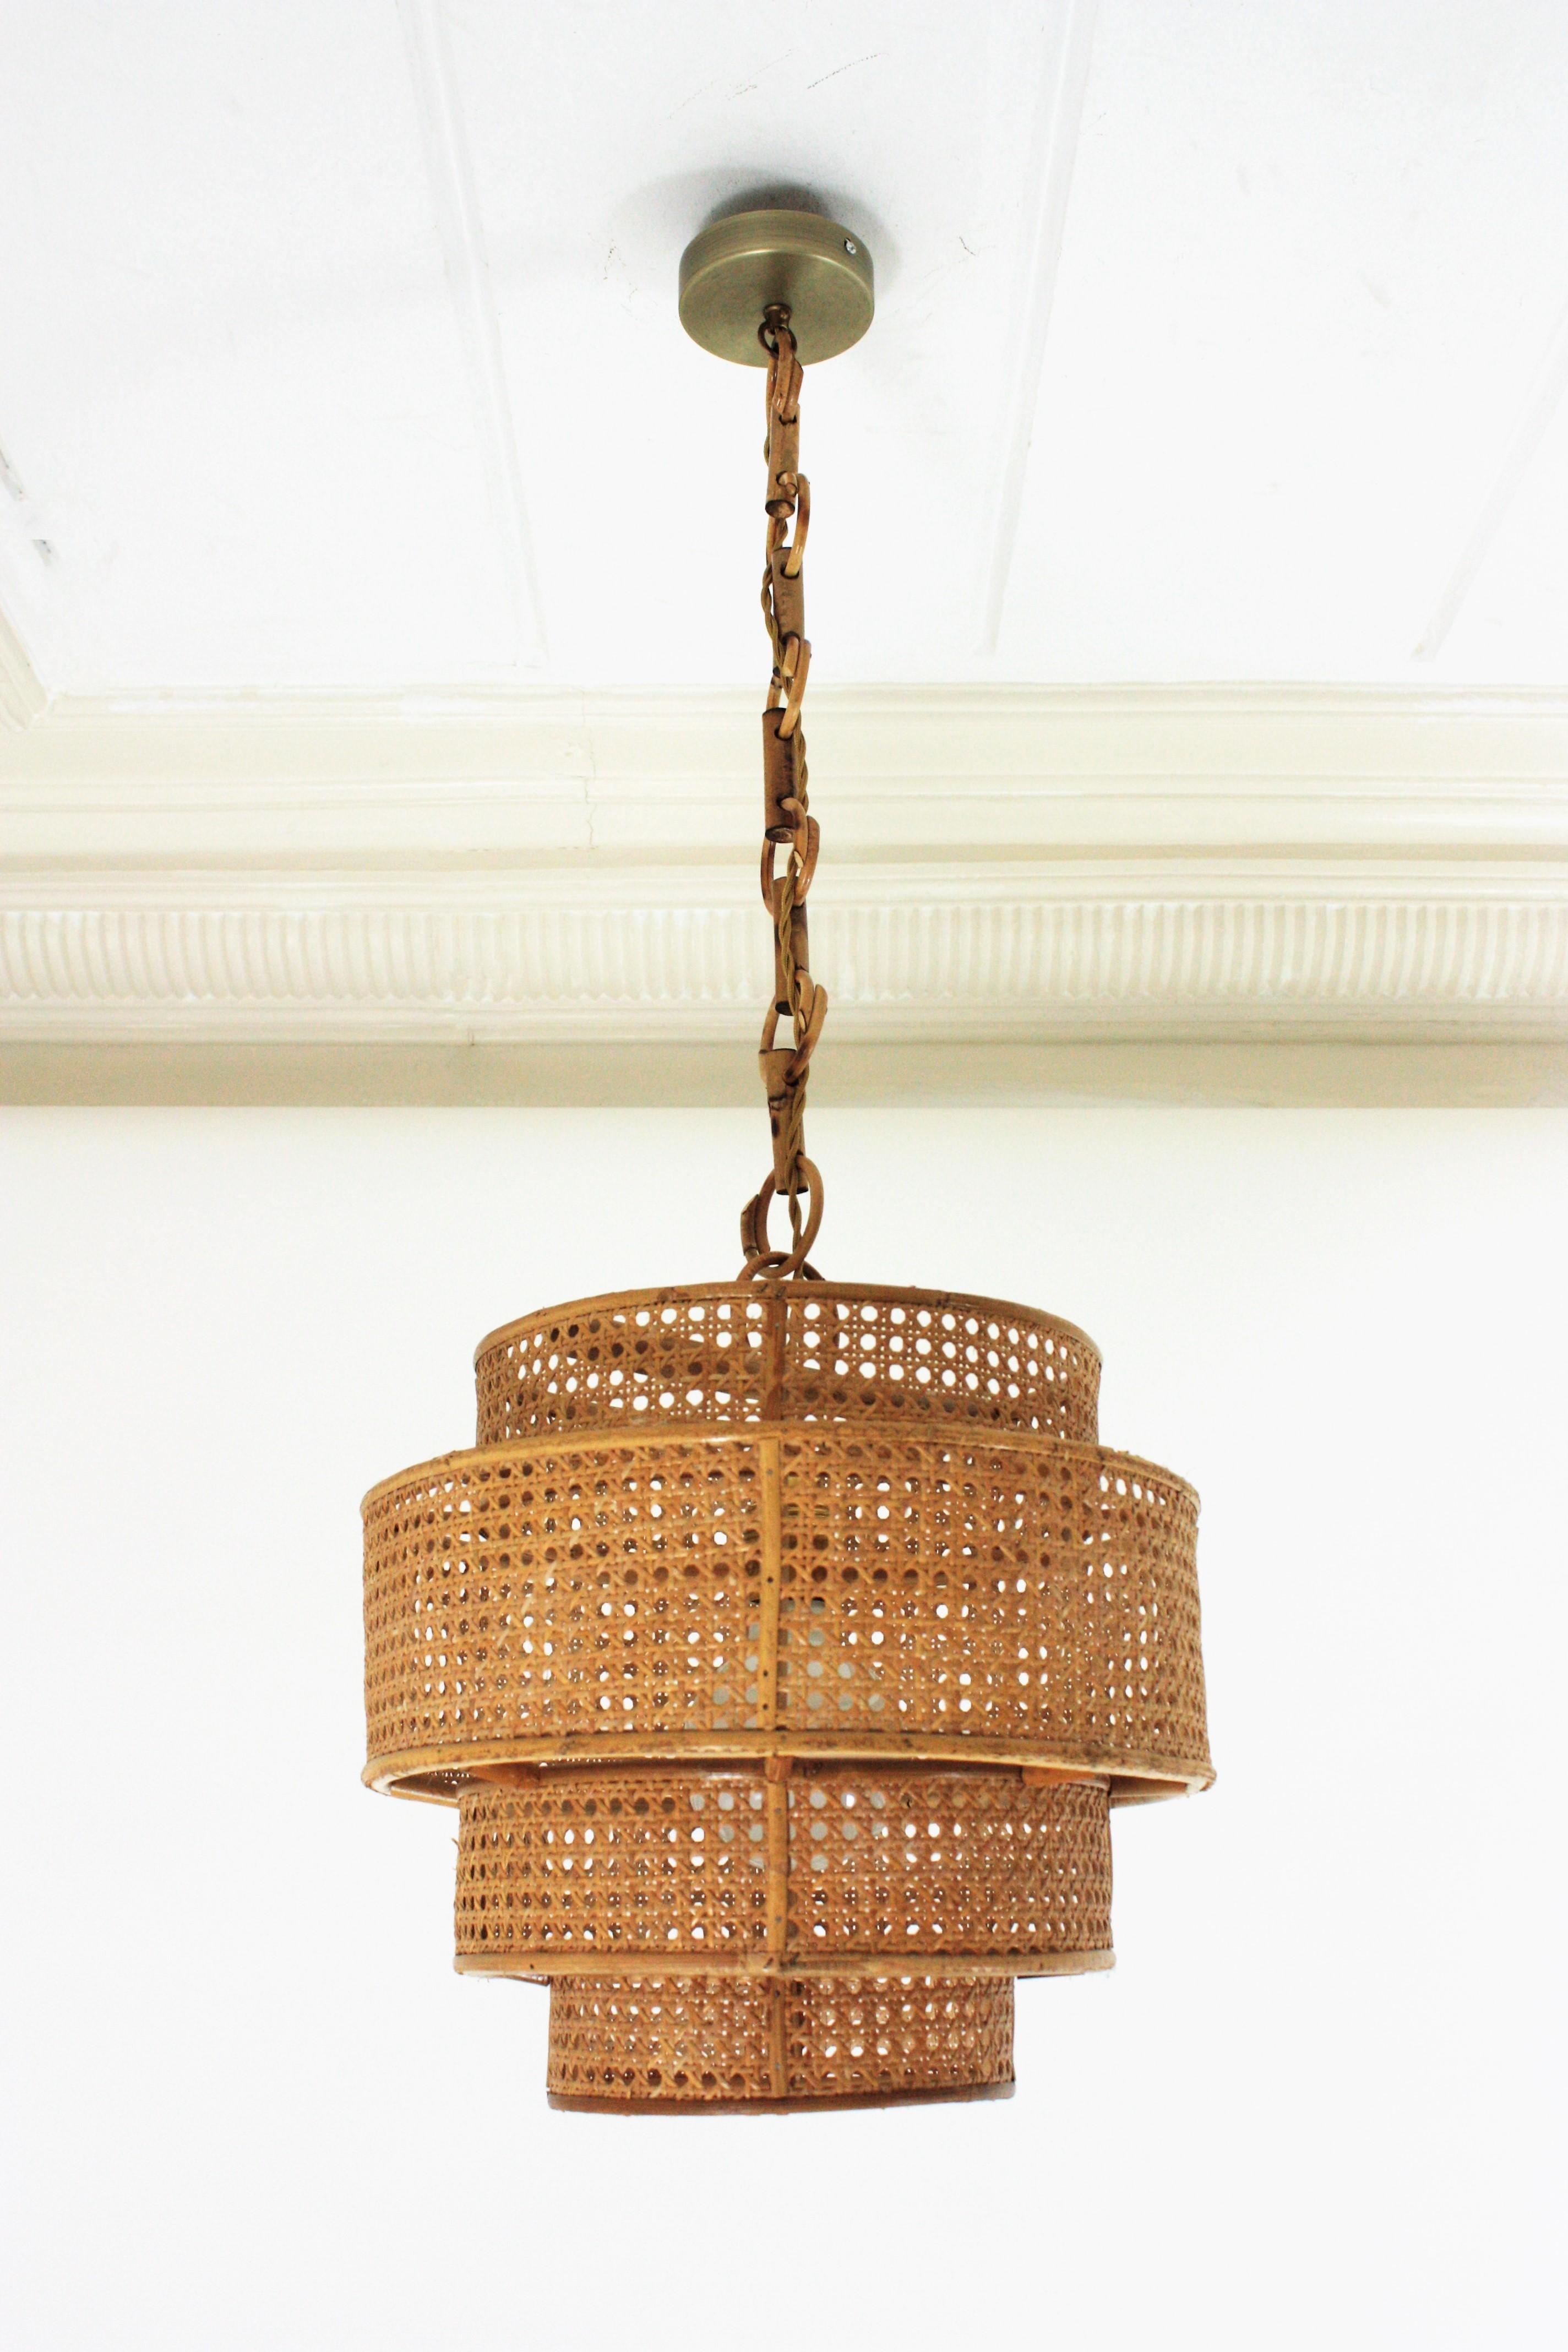 Hand-Crafted  Rattan Wicker Weave Concentric Cylinder Pendant Hanging Light, 1960s For Sale